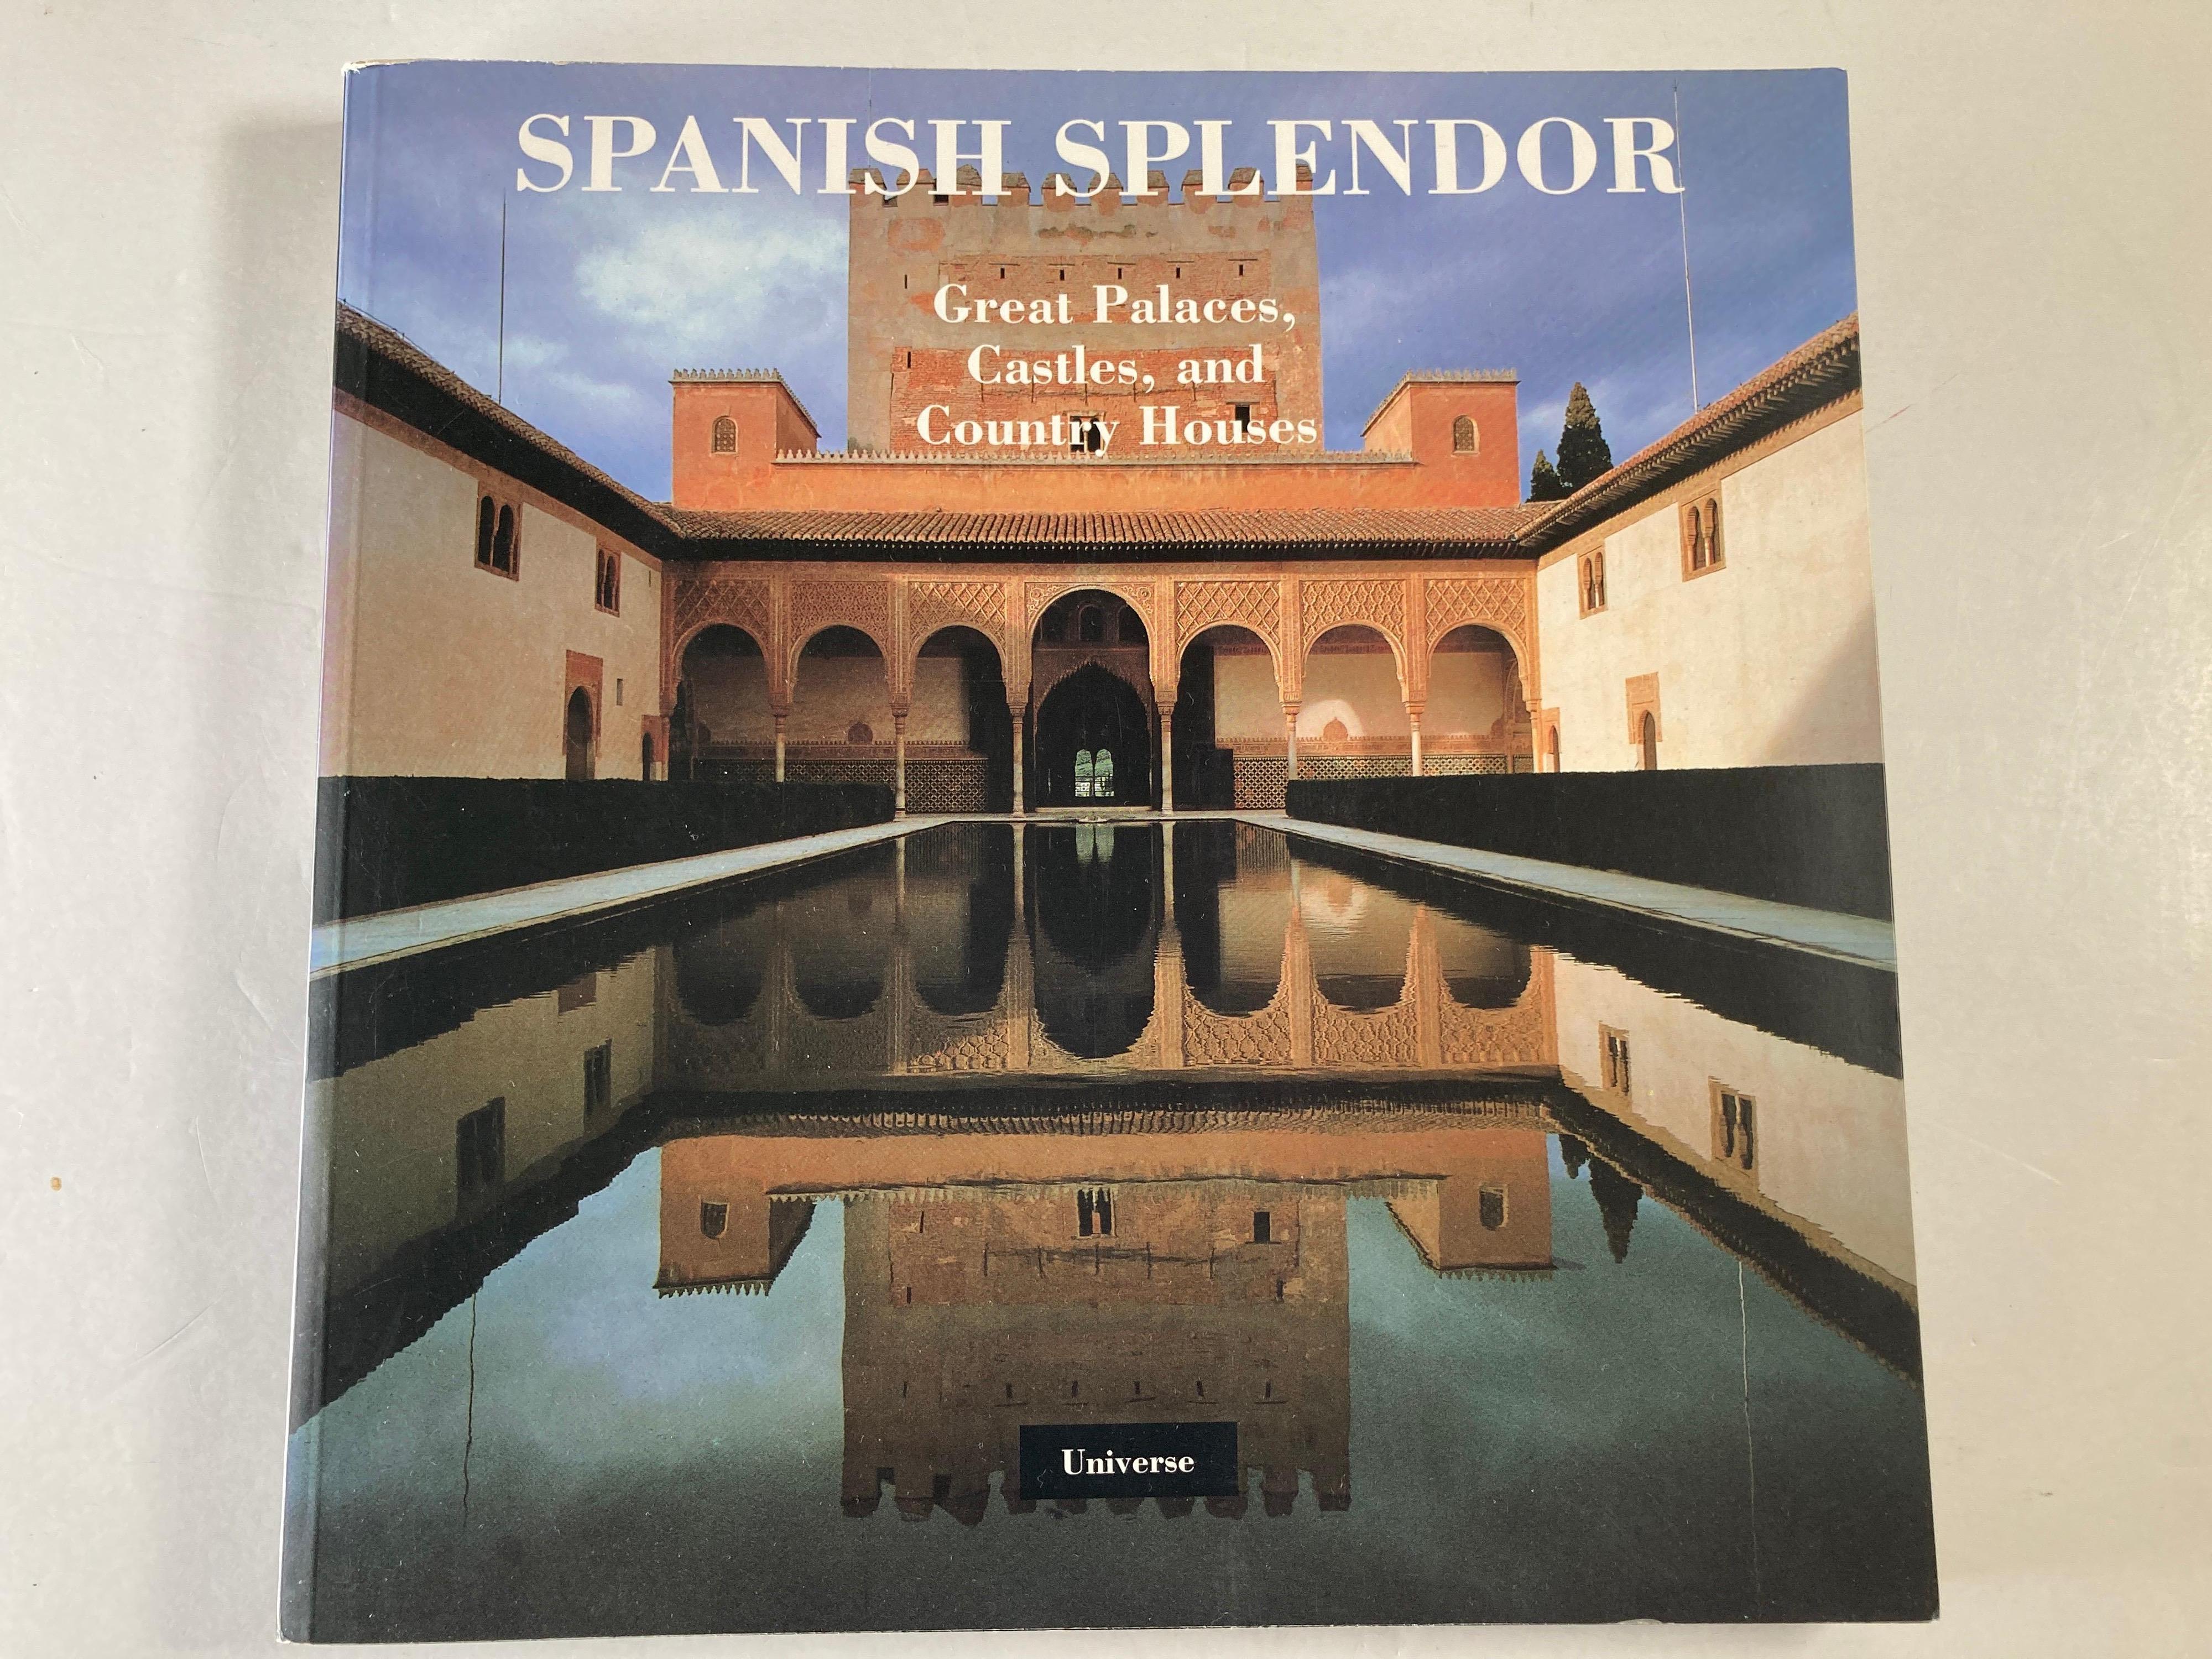 Spanish Splendor: Great Palaces, Castles, and Country Homes softcover book.
y Mato, Juan Jose Junquera (text by); Schezen, Roberto (photographs by); y Morenes, Enrique Ruspoli (introduction).
From Aragon, Galicia, and the Basque regions in the north